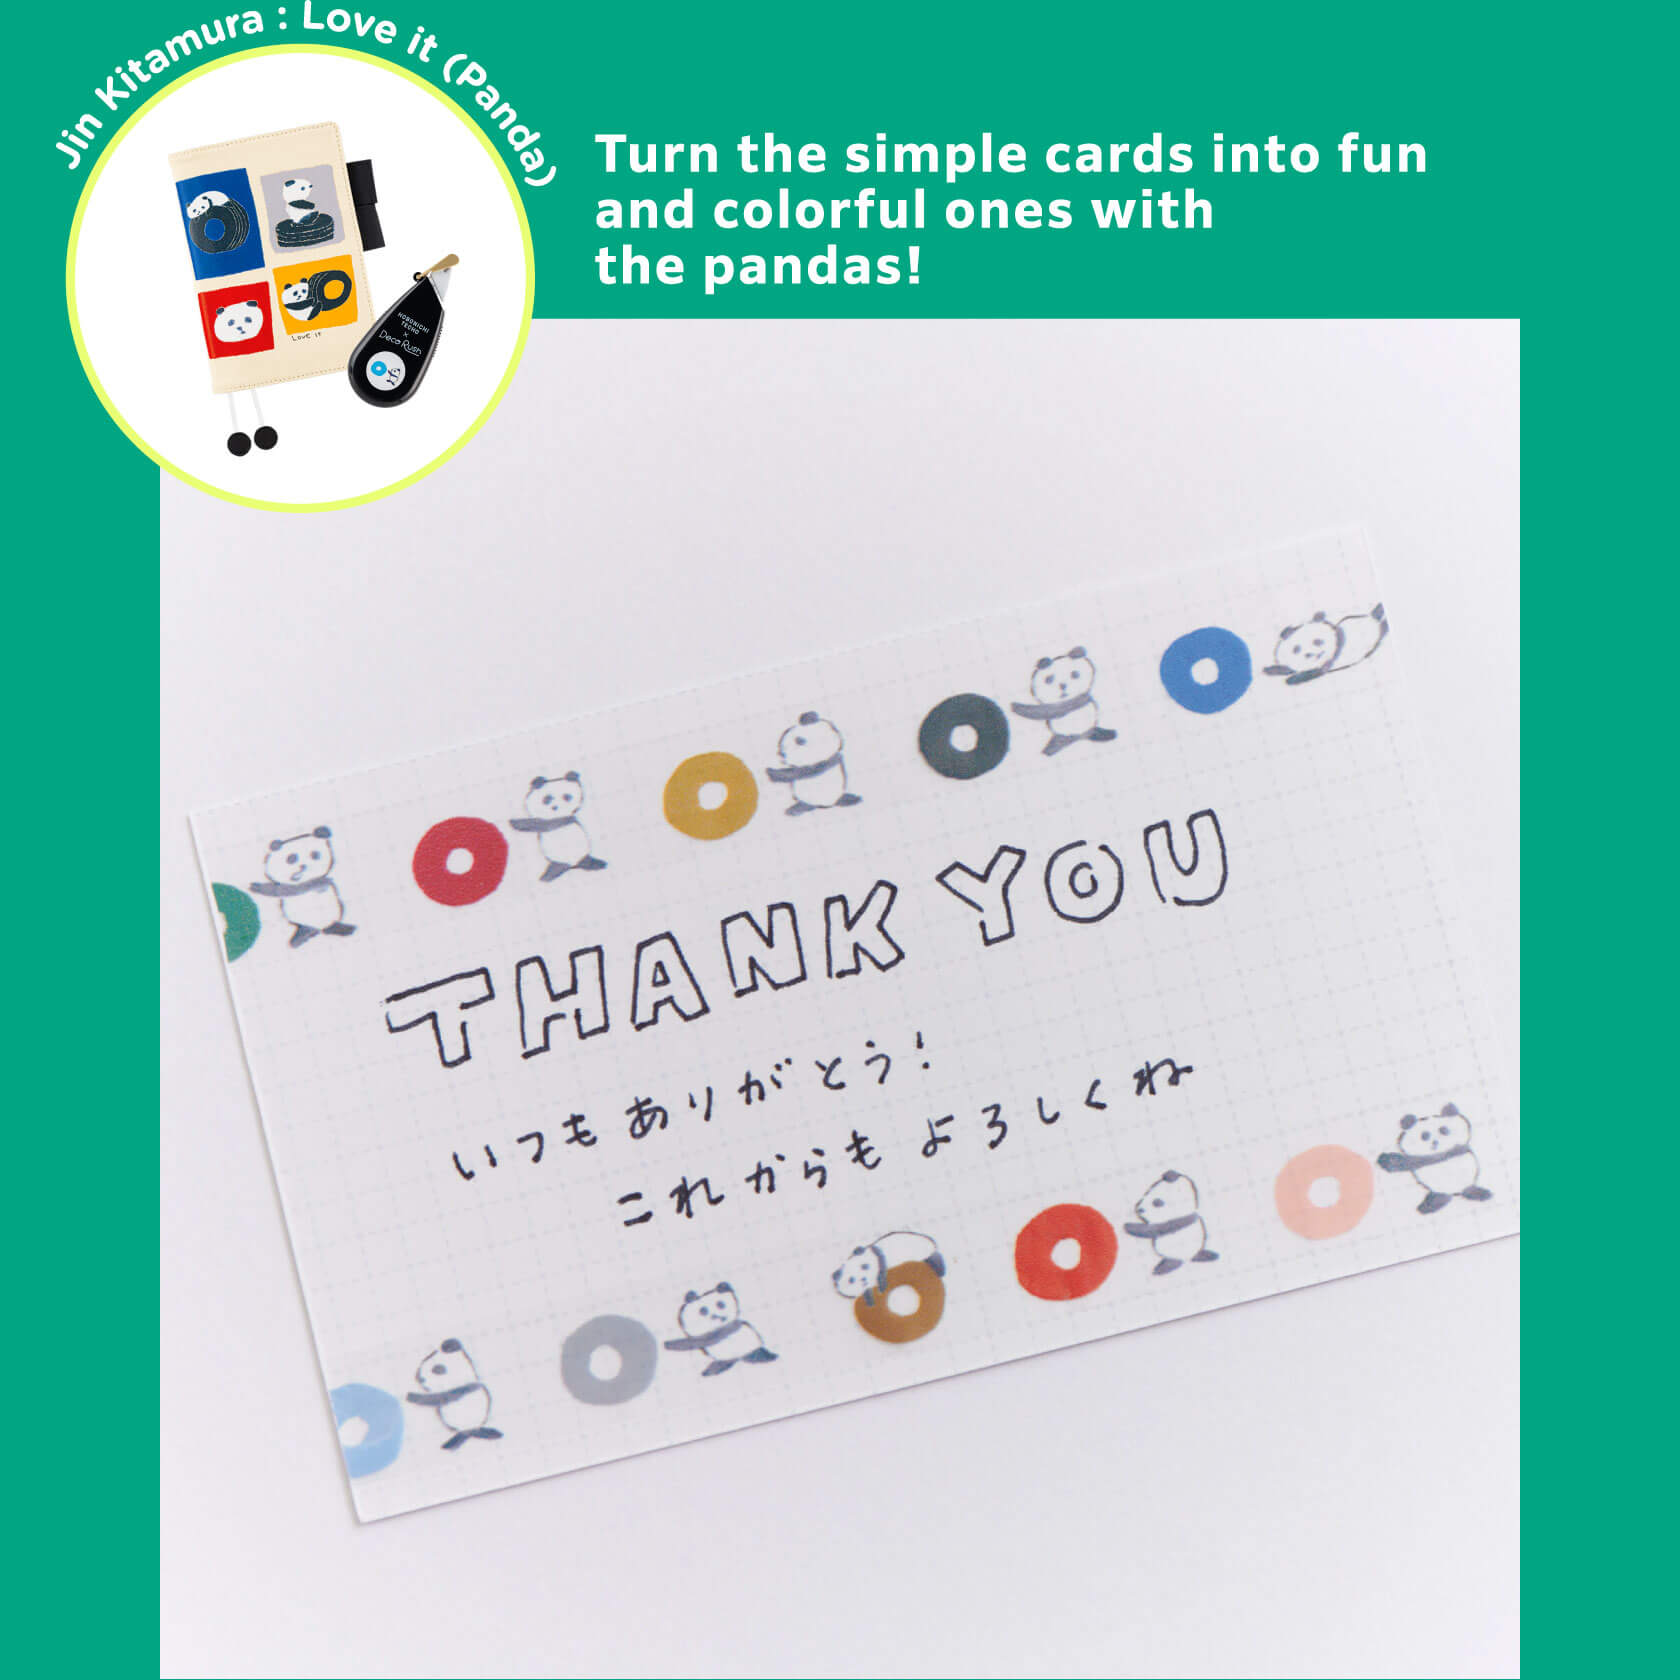 Usage Example (Jin Kitamura)
                    Turn the simple cards into fun and colorful ones with the pandas!